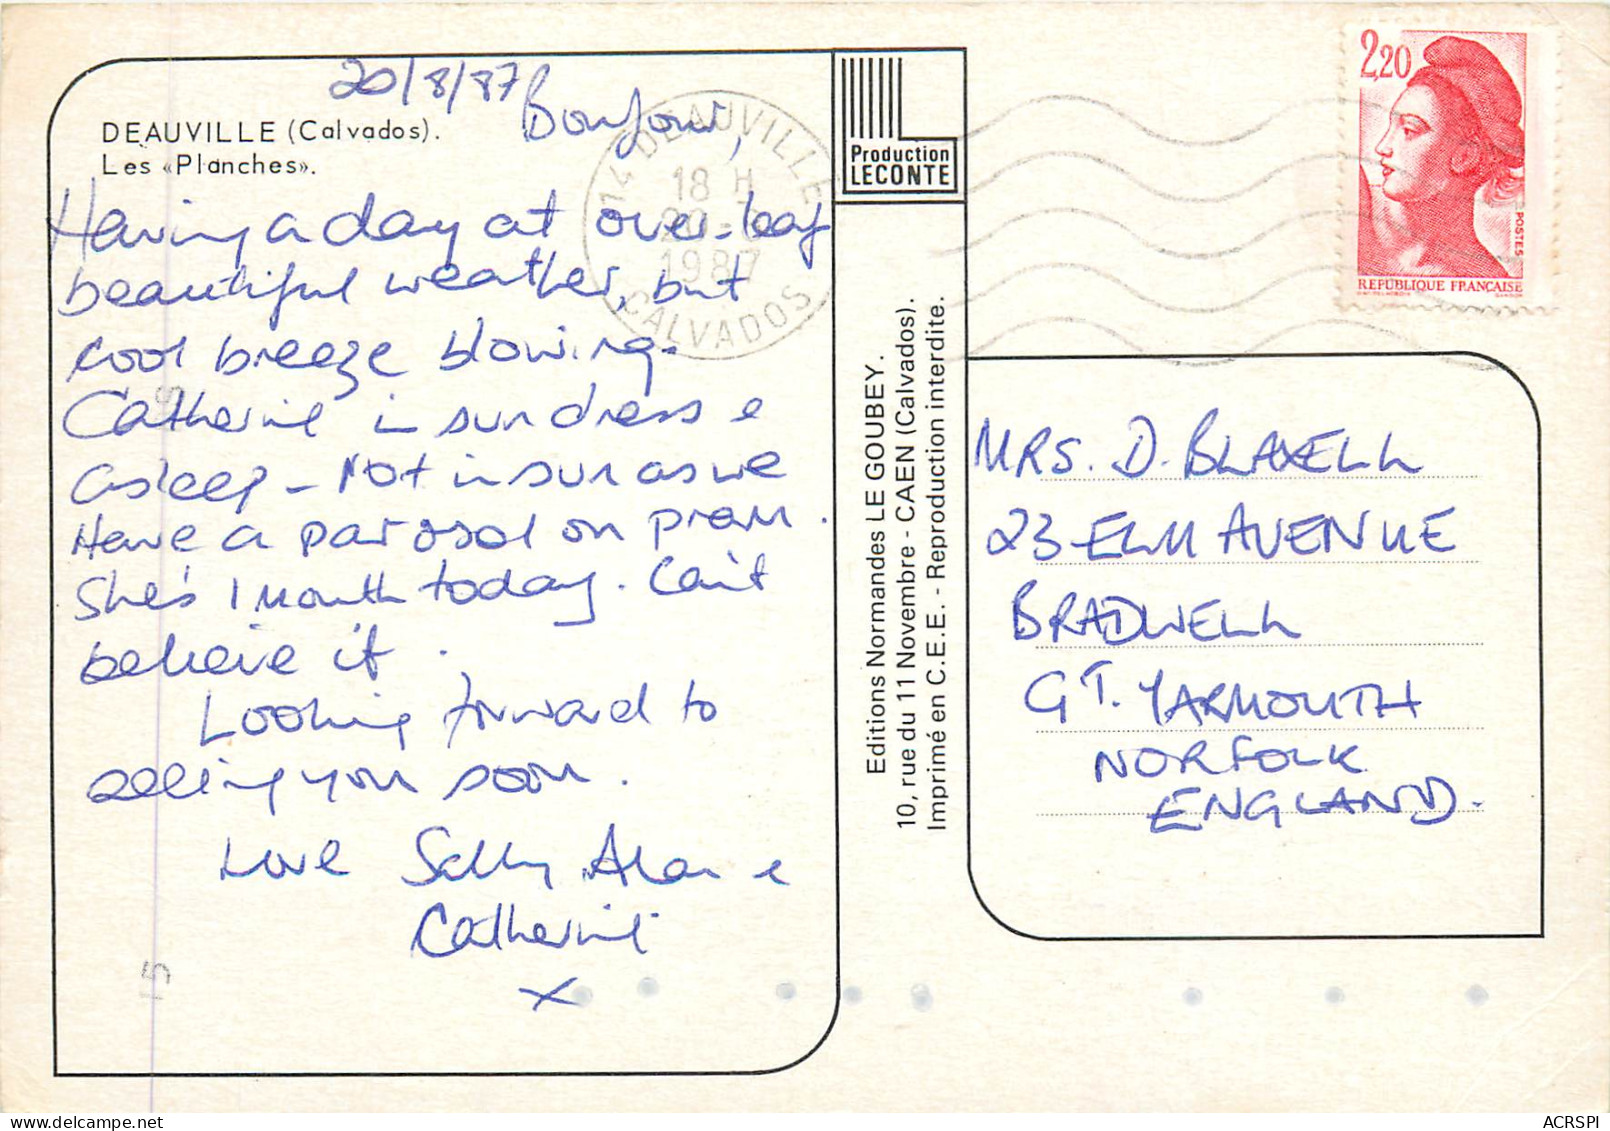 DEAUVILLE Les Planches 14(scan Recto-verso) MB2381 - Deauville